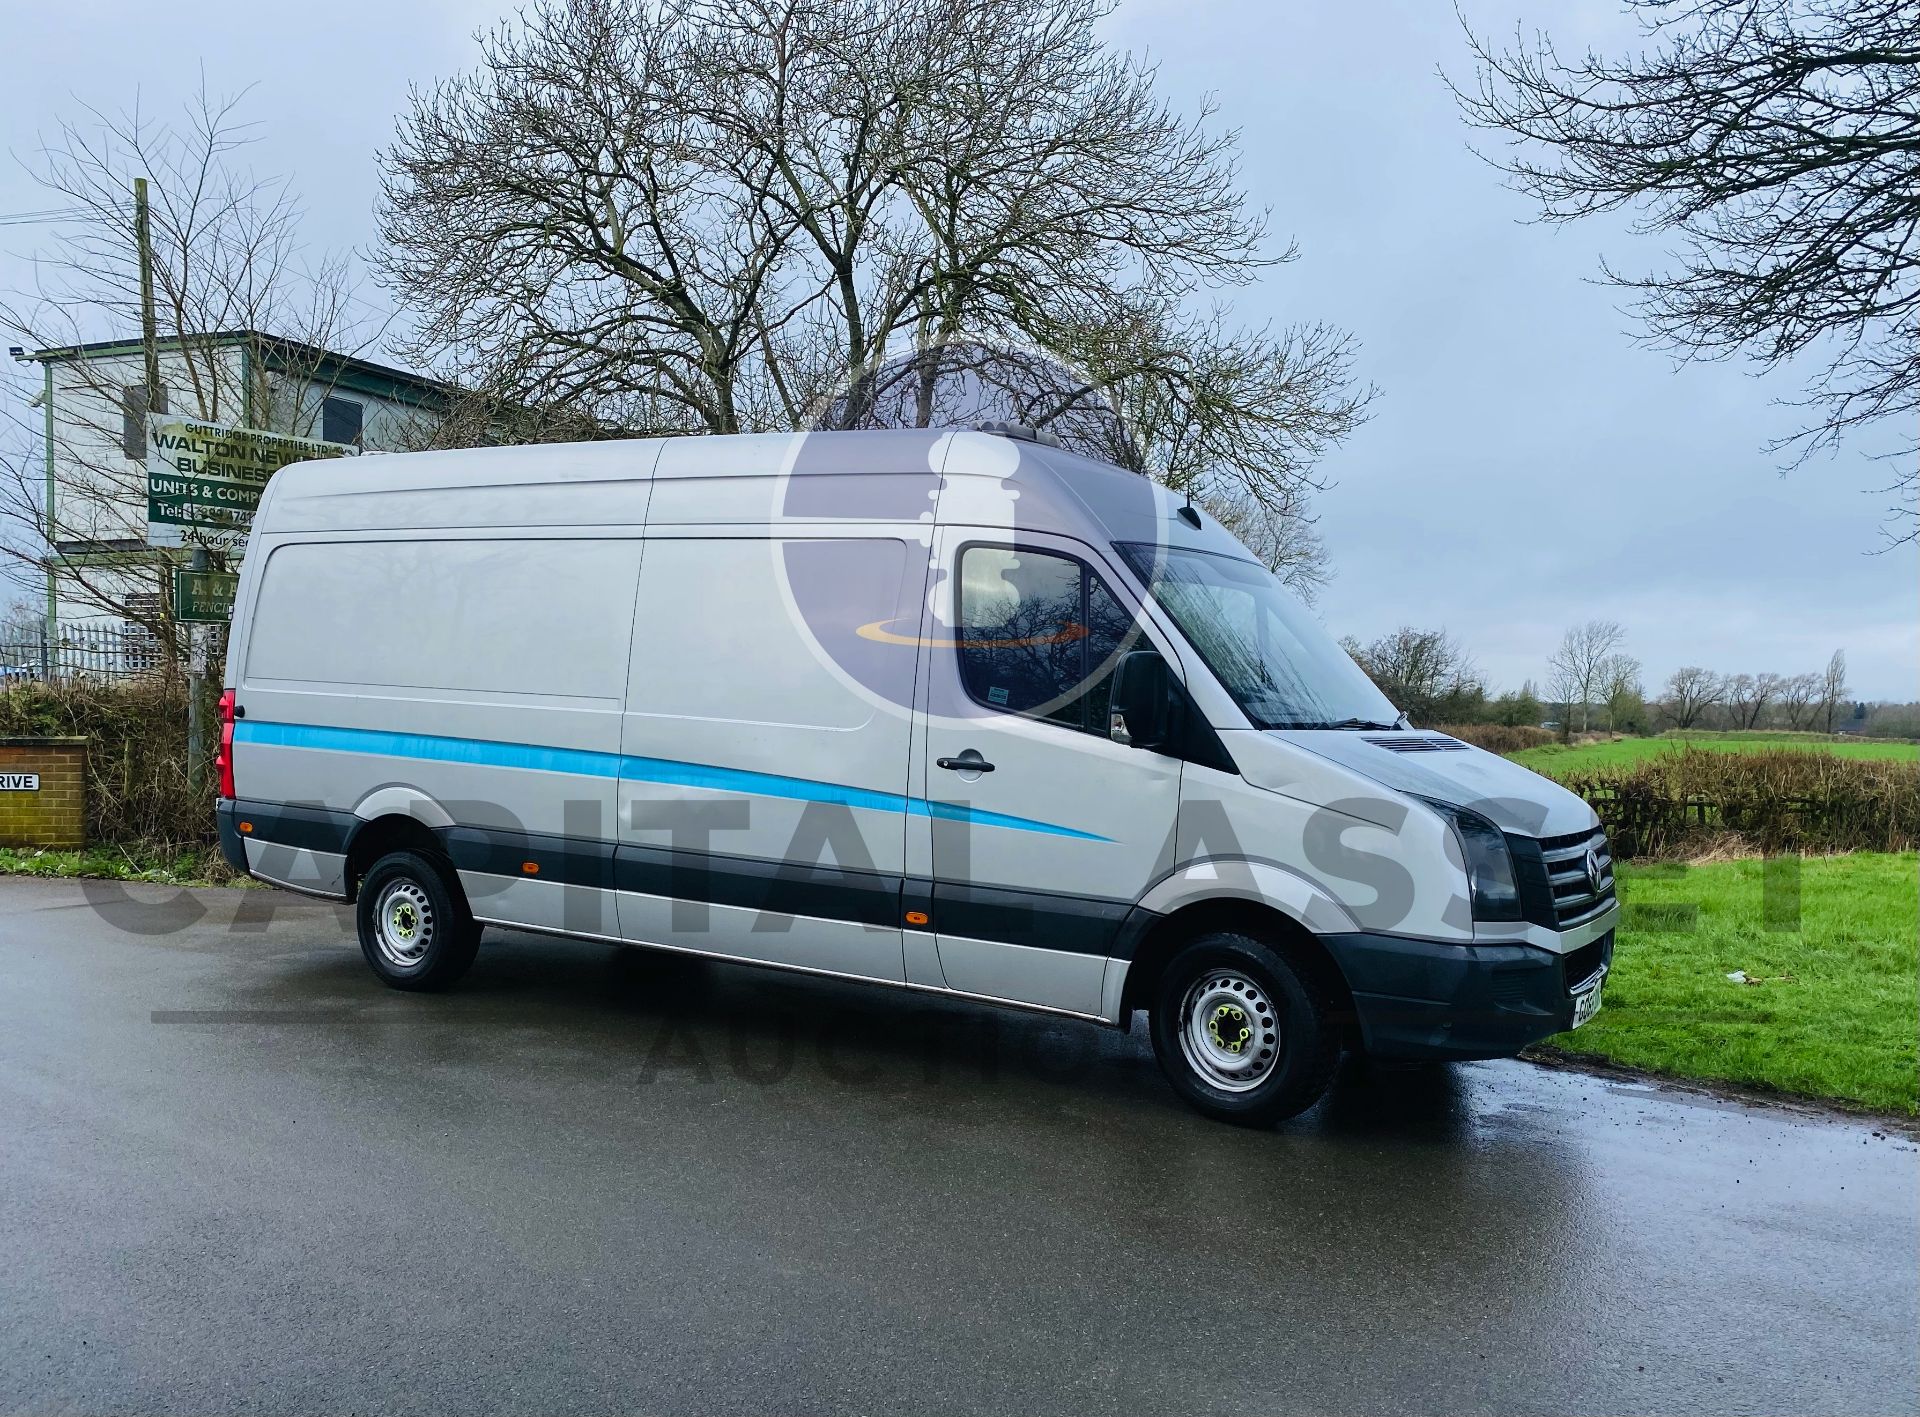 (ON SALE / RESERVE MET) VOLKSWAGON CRAFTER 2.0 TDI LONG WHEEL BASE AIR CONDITIONING-LONG WHEEL BASE